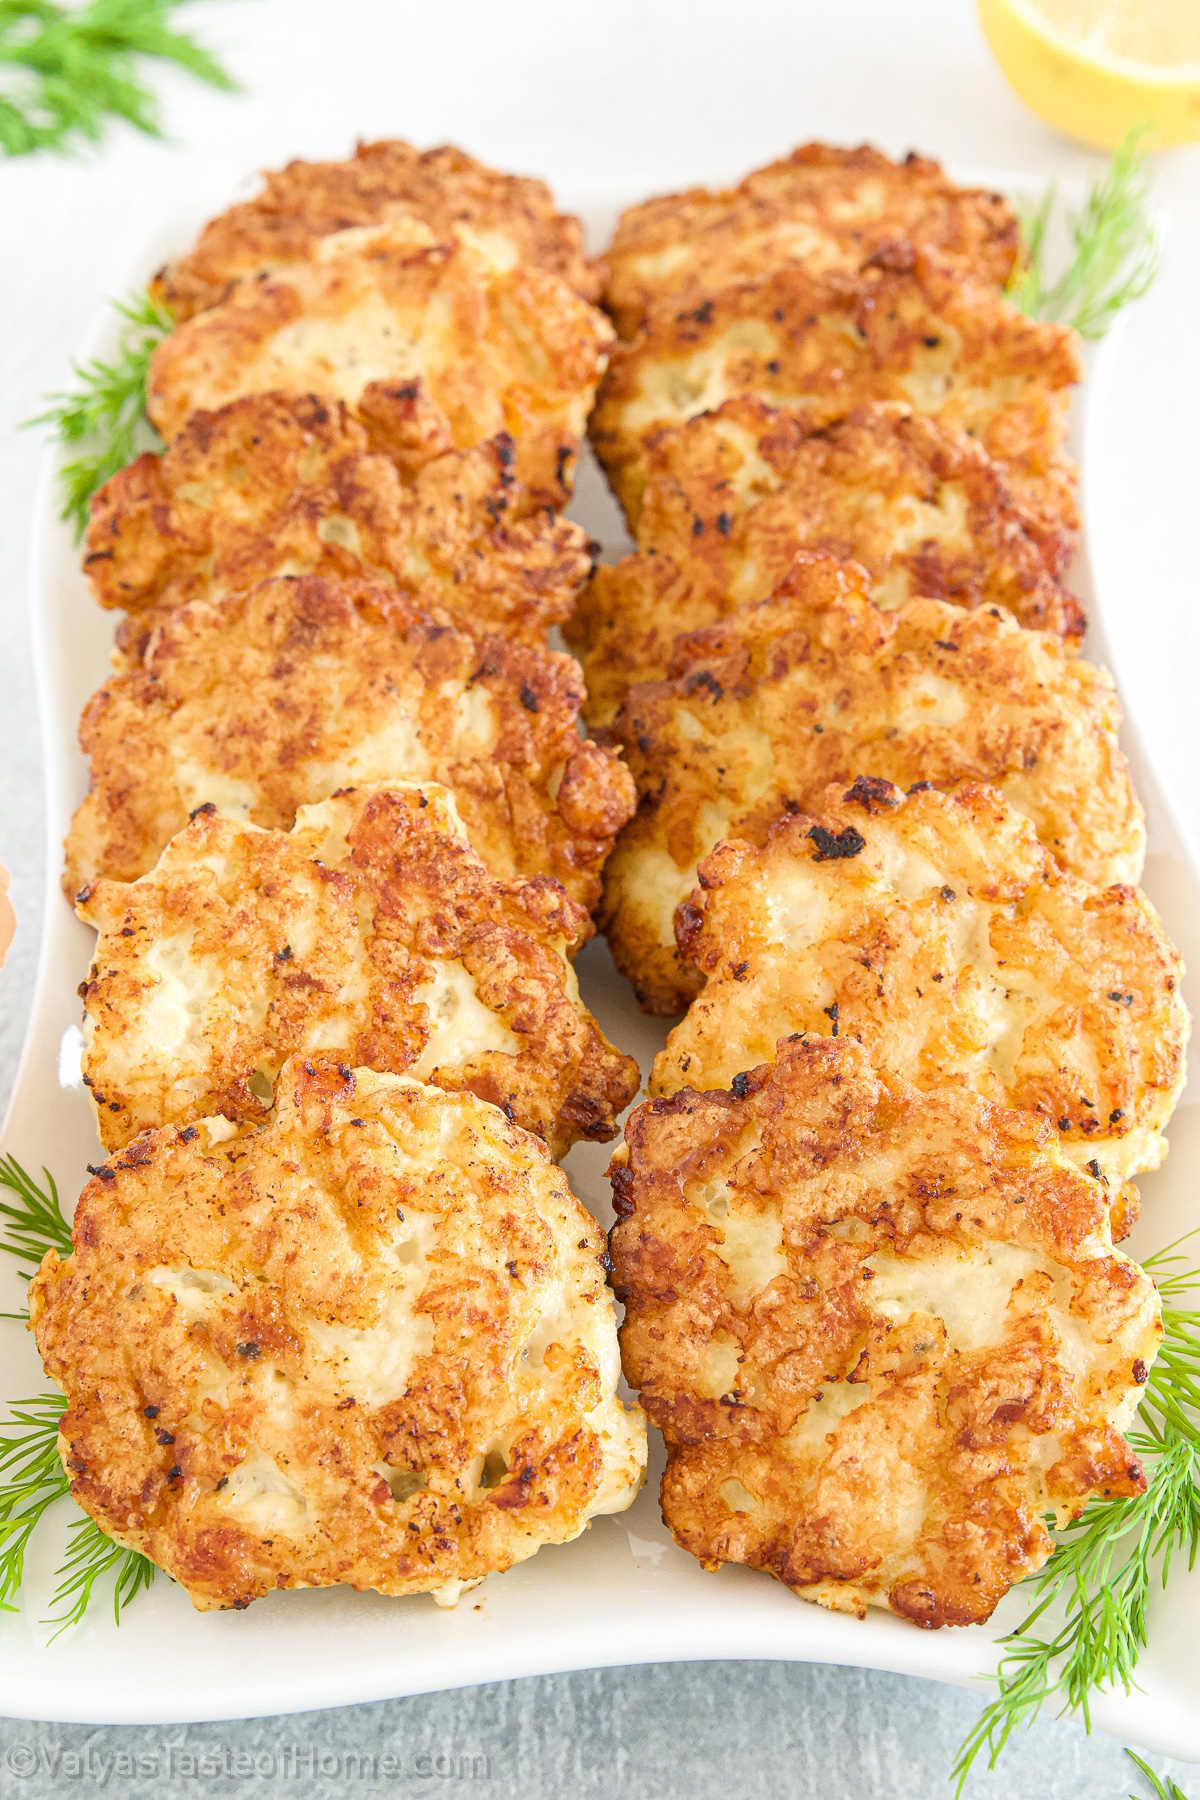 Chicken fritters can be served as an appetizer, side dish, or main course. 